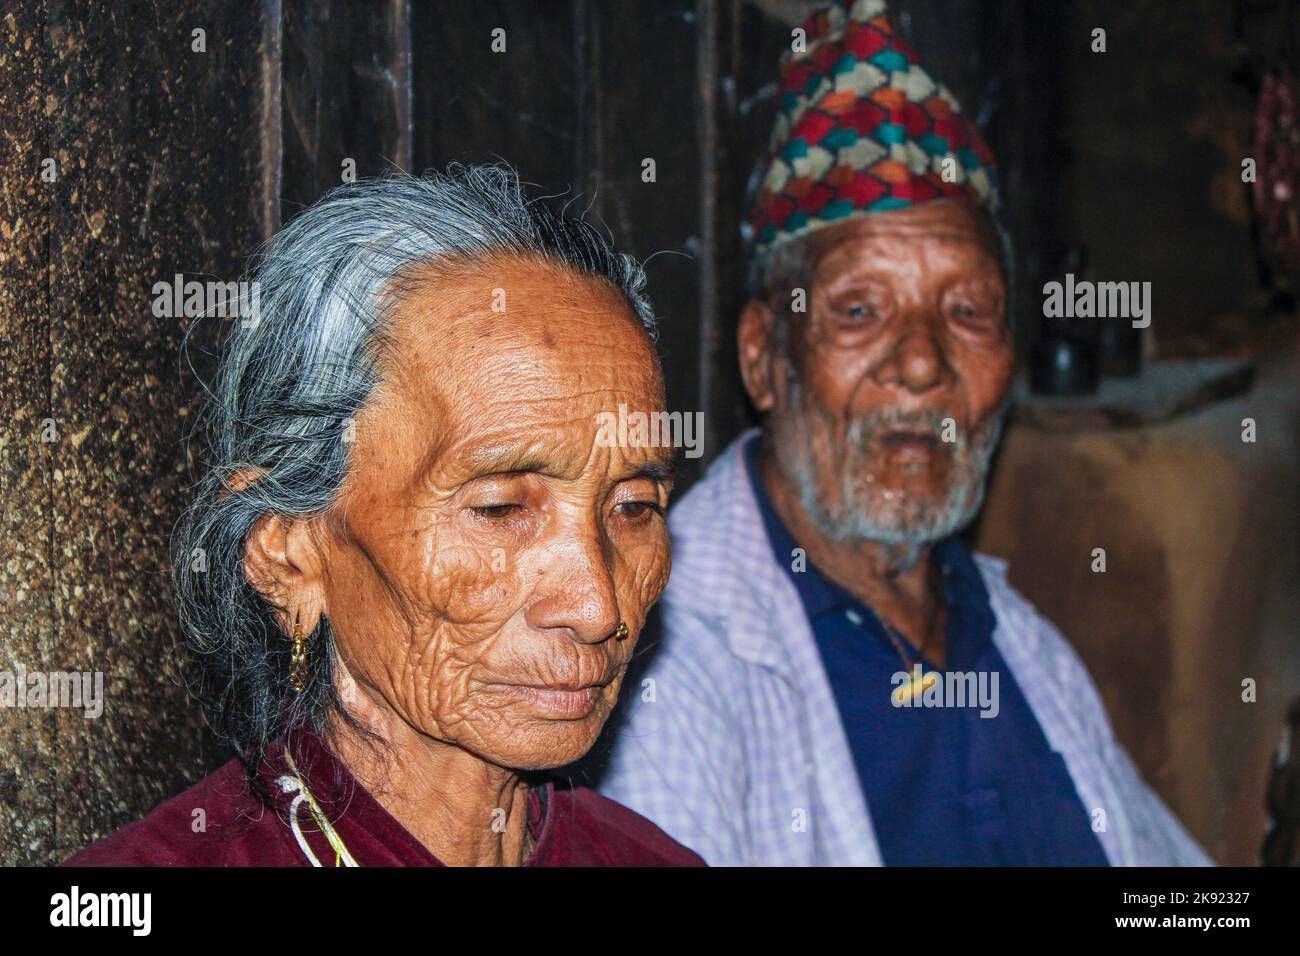 JOMSON, NEPAL - OCT 14, 2013: portrait of old nepalese woman. She wears a nose jewelry as symbol of wealth. Stock Photo